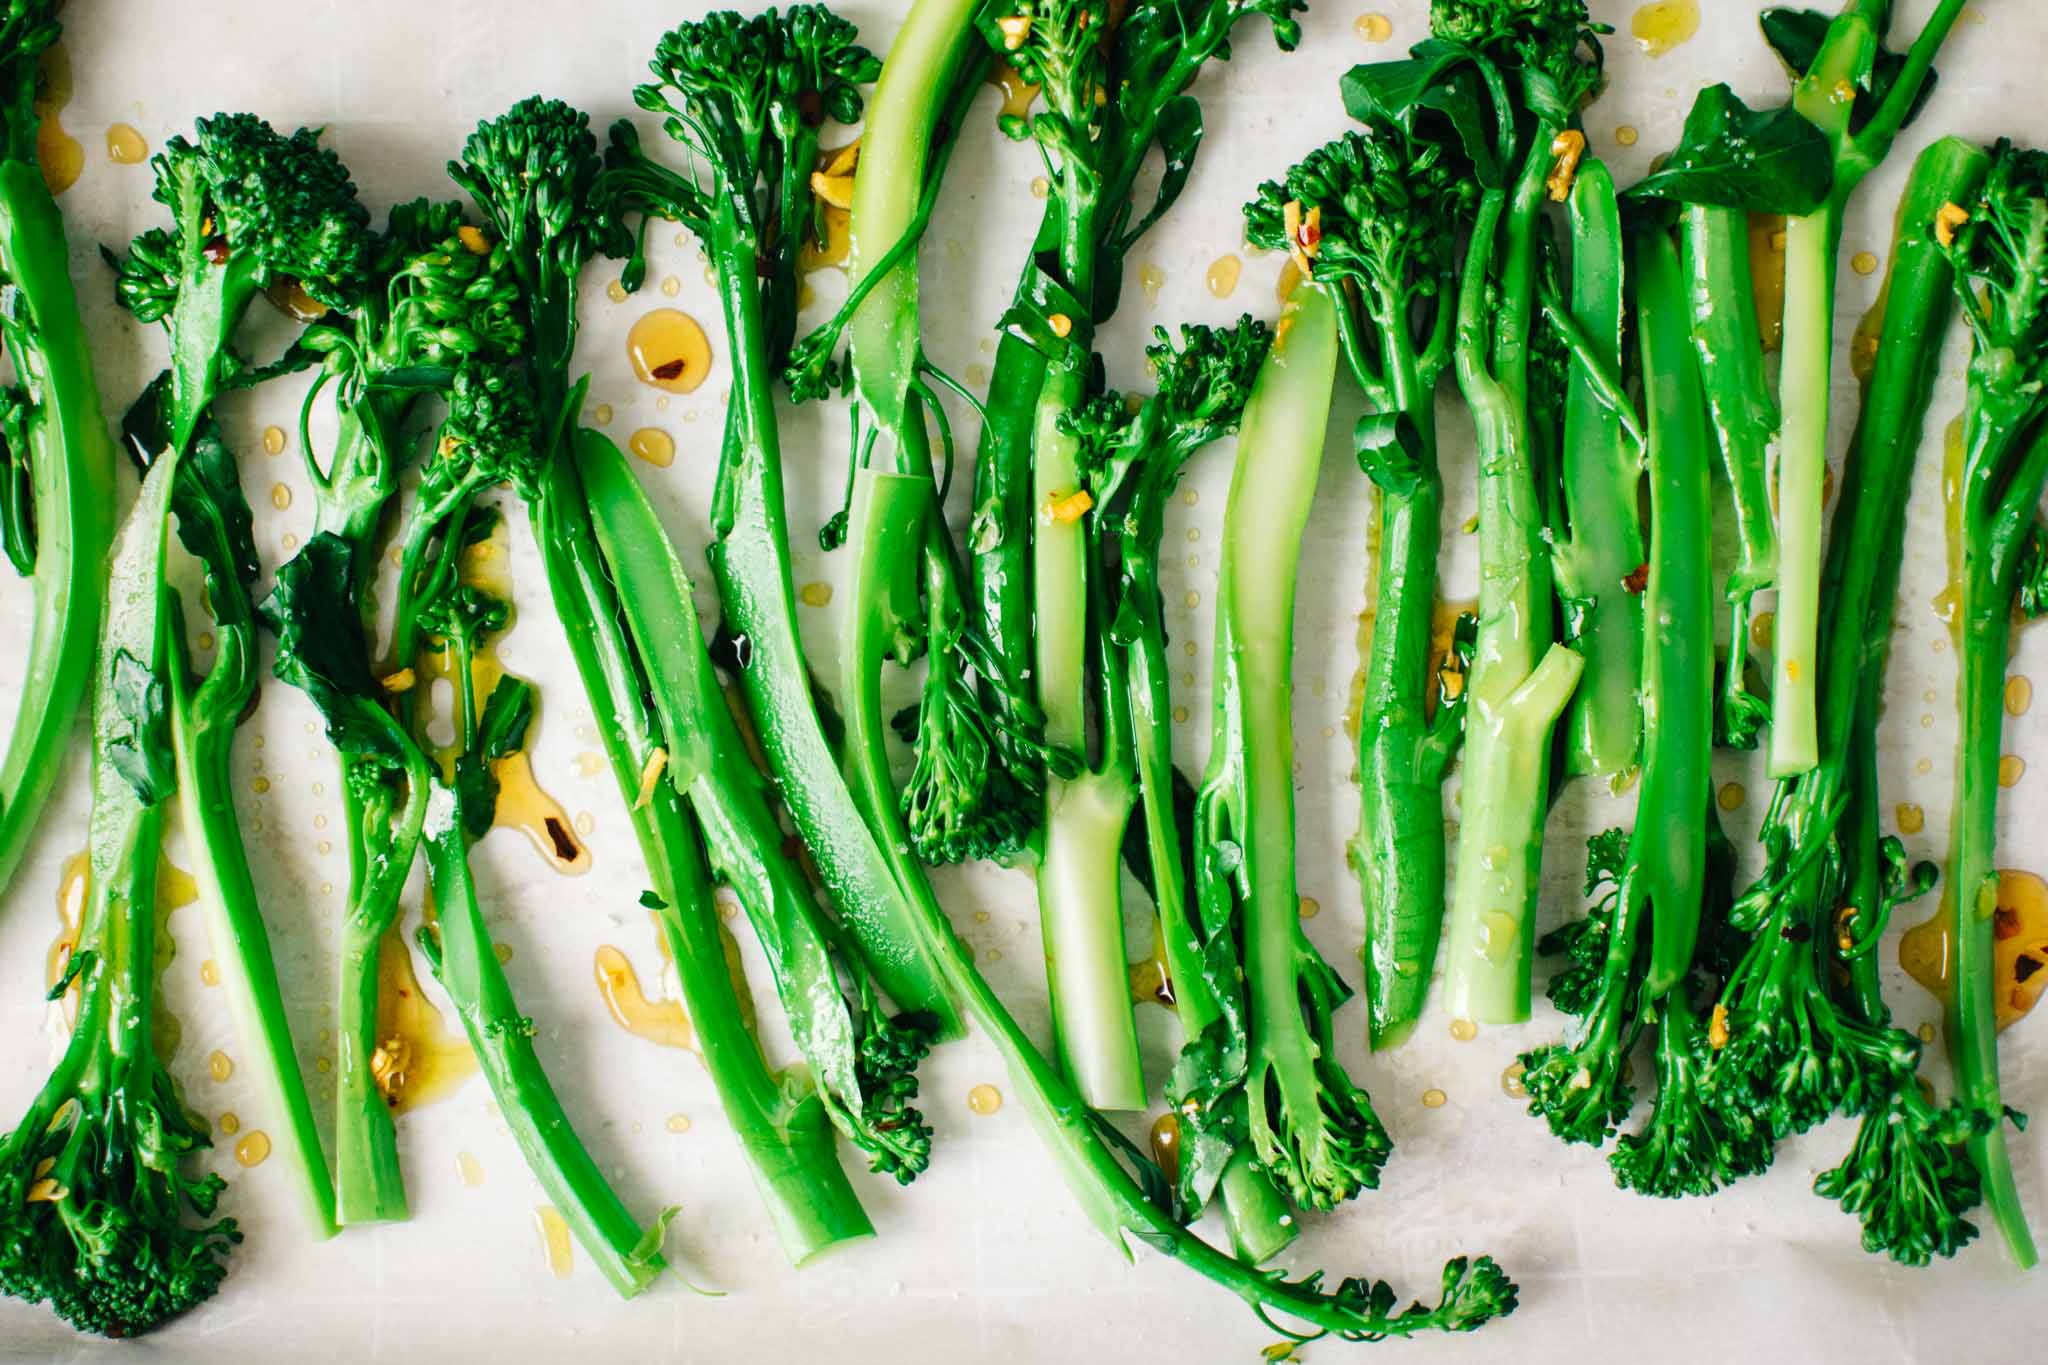 Sweet 'n' Spicy Charred Broccolini with Garlicky Ricotta